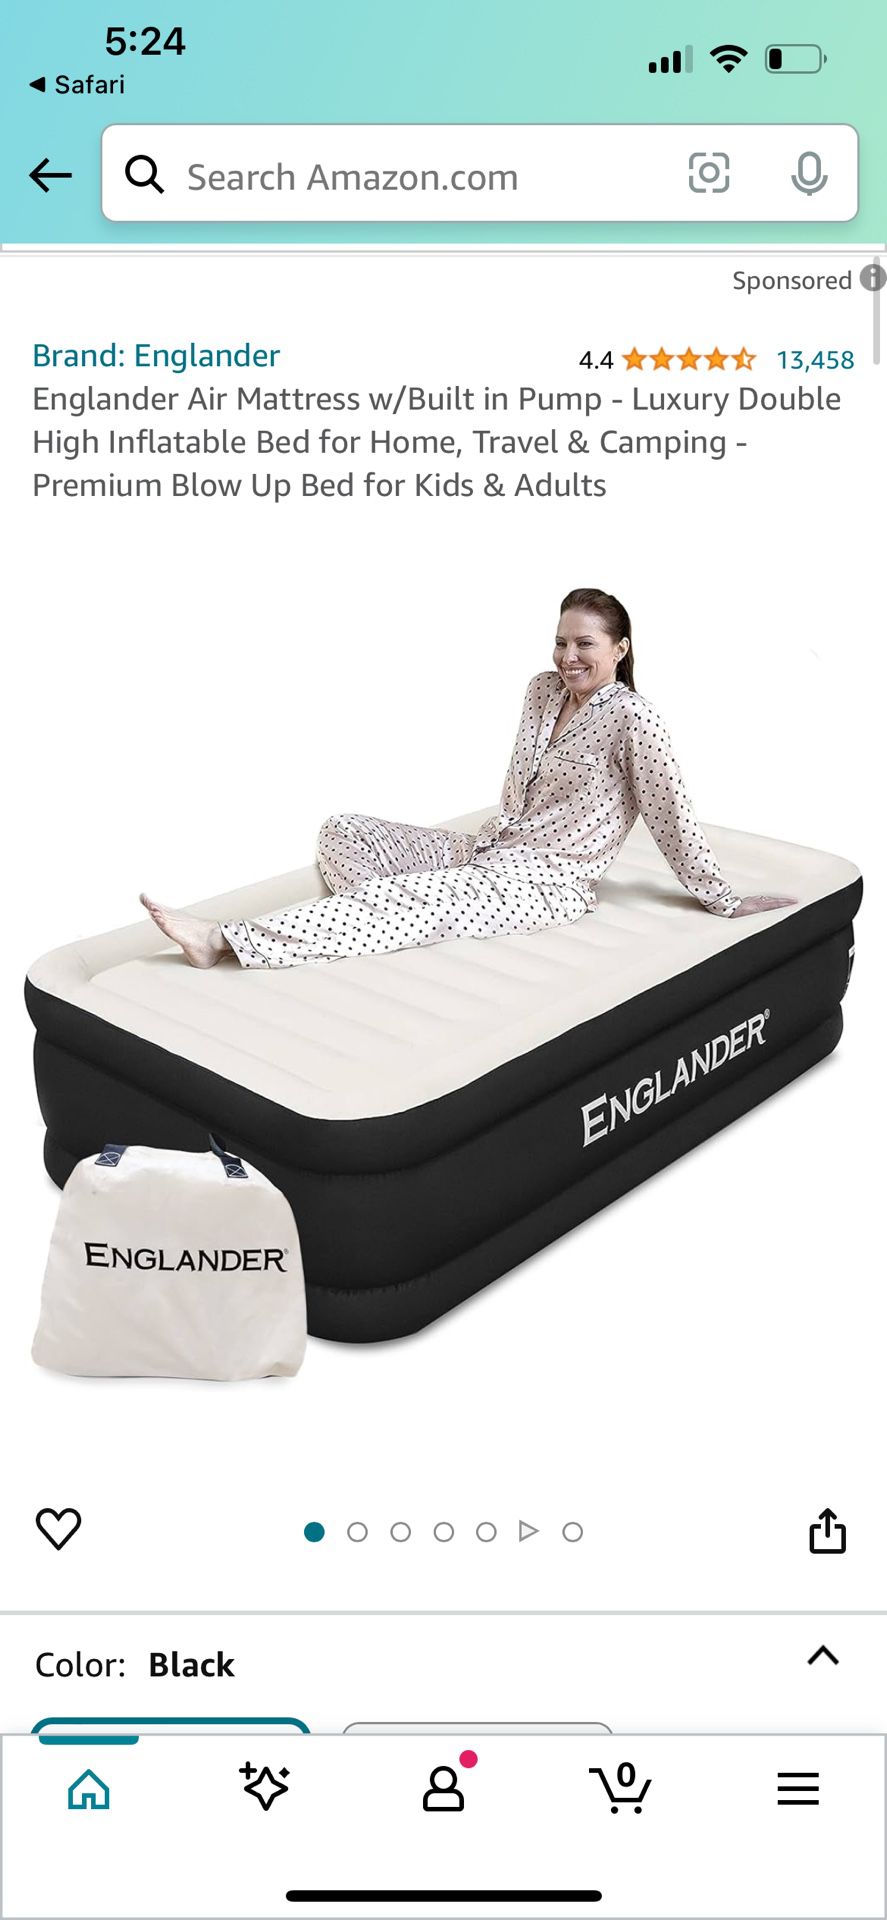 Englander Air Mattress w/Built in Pump - Luxury Double High Inflatable Bed for Home, Travel & Camping - Premium Blow Up Bed for Kids & Adults